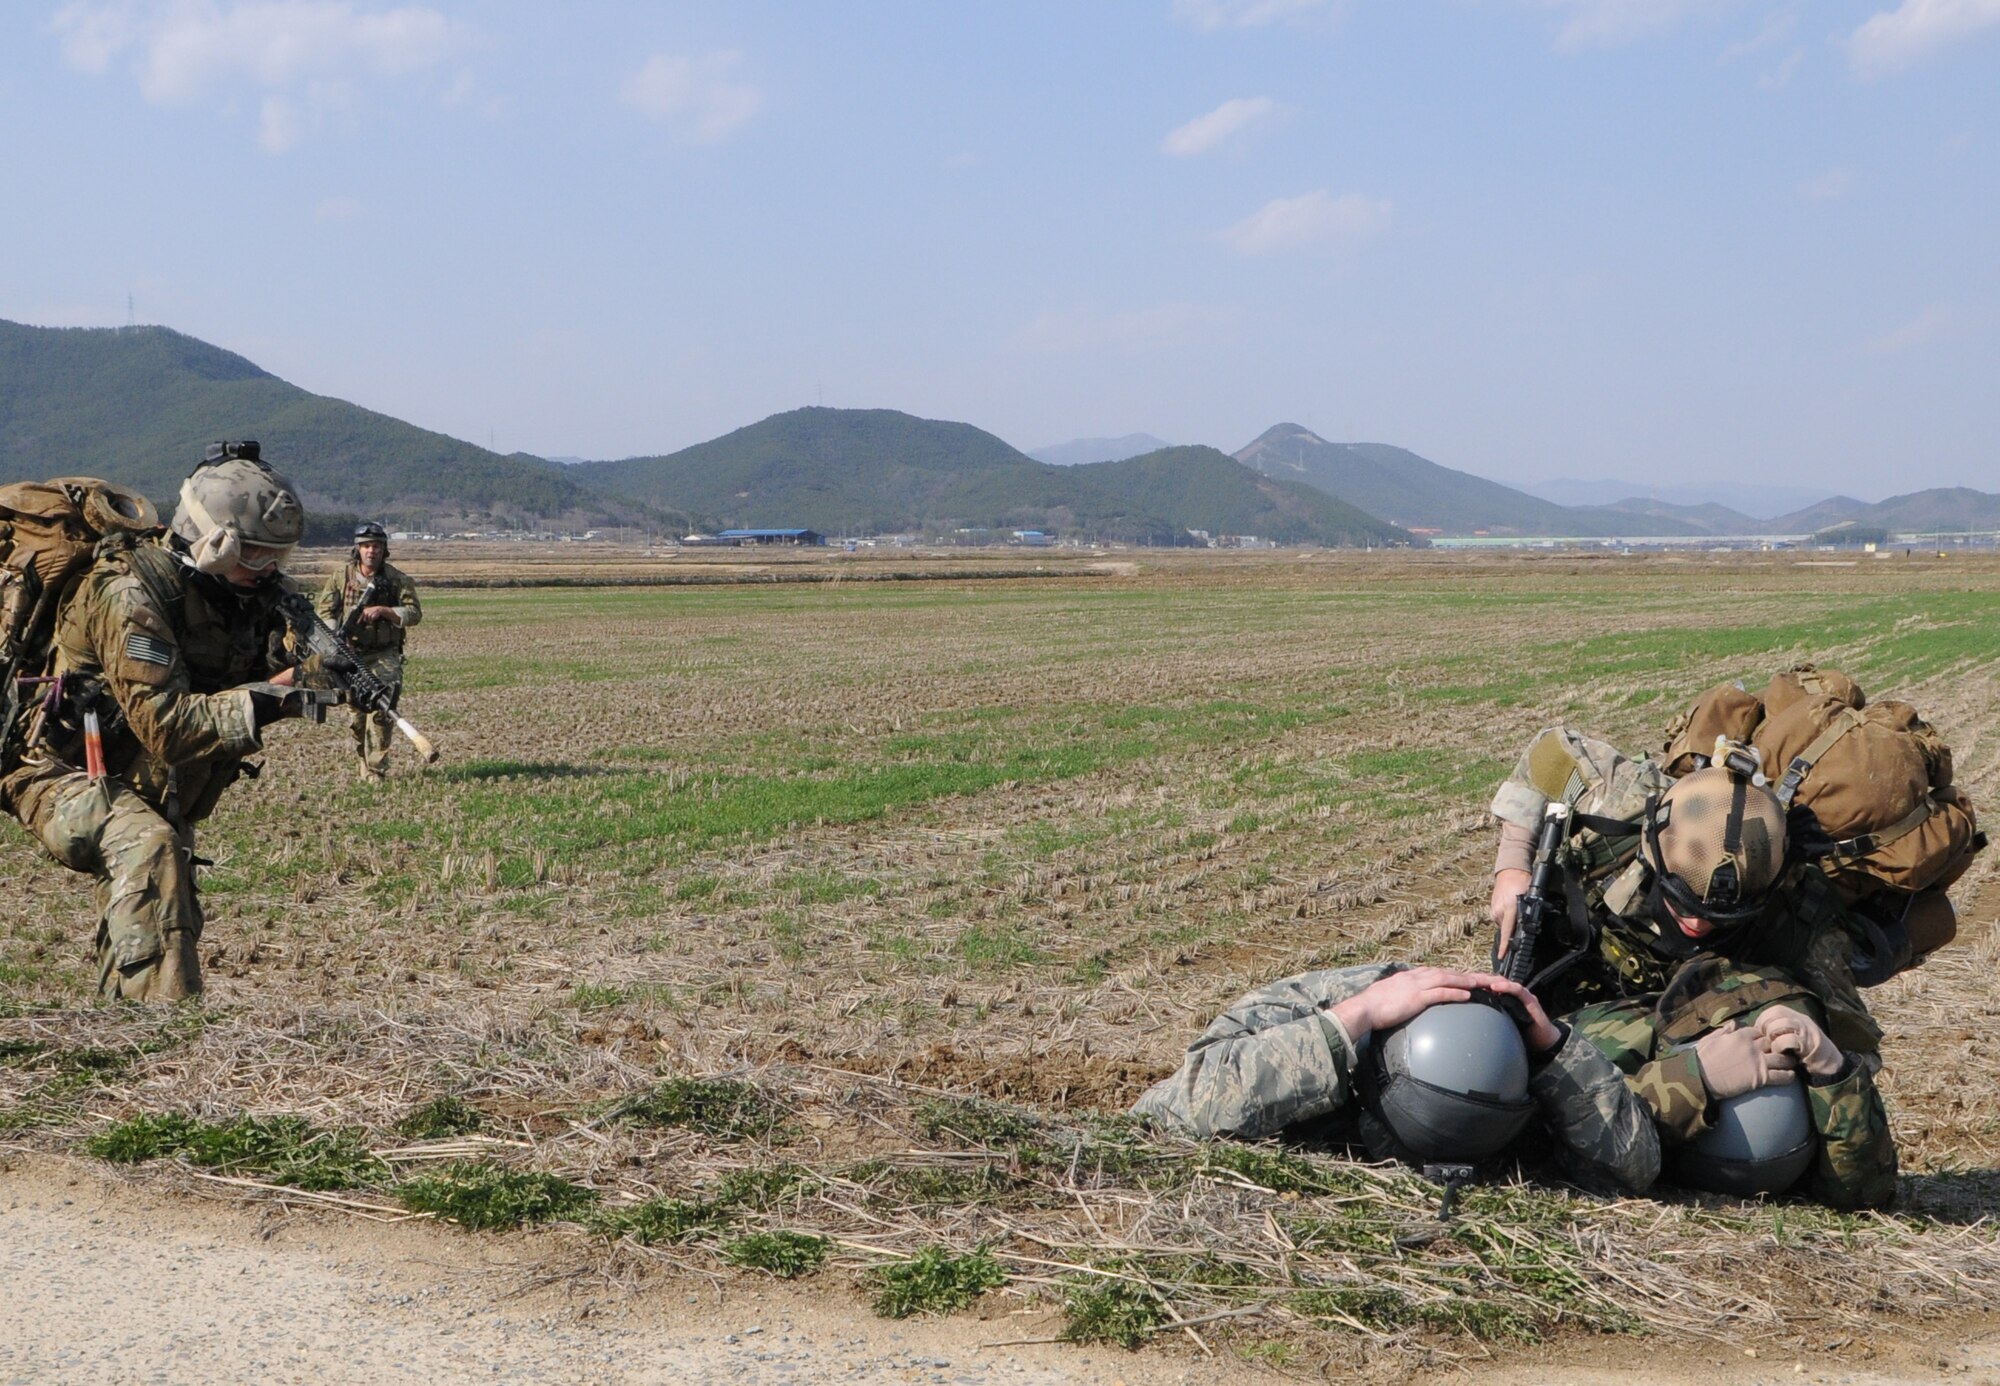 NEAR AN’GANG, Republic of Korea -- Senior Airman David Craig verifies the identity of two simulated aircrew members as Senior Airman Cody Cerny provides cover during a combat search and rescue exercise here March 26.The pararescuemen from the 320th Special Tactics Squadron had to locate and treat two simulated wounded aircrew members before calling for evacuation during the scenario.  The scenario is part of the 353rd Special Operations Group’s annual operational readiness exercise. (U.S. Air Force photo by Tech. Sgt. Aaron Cram)